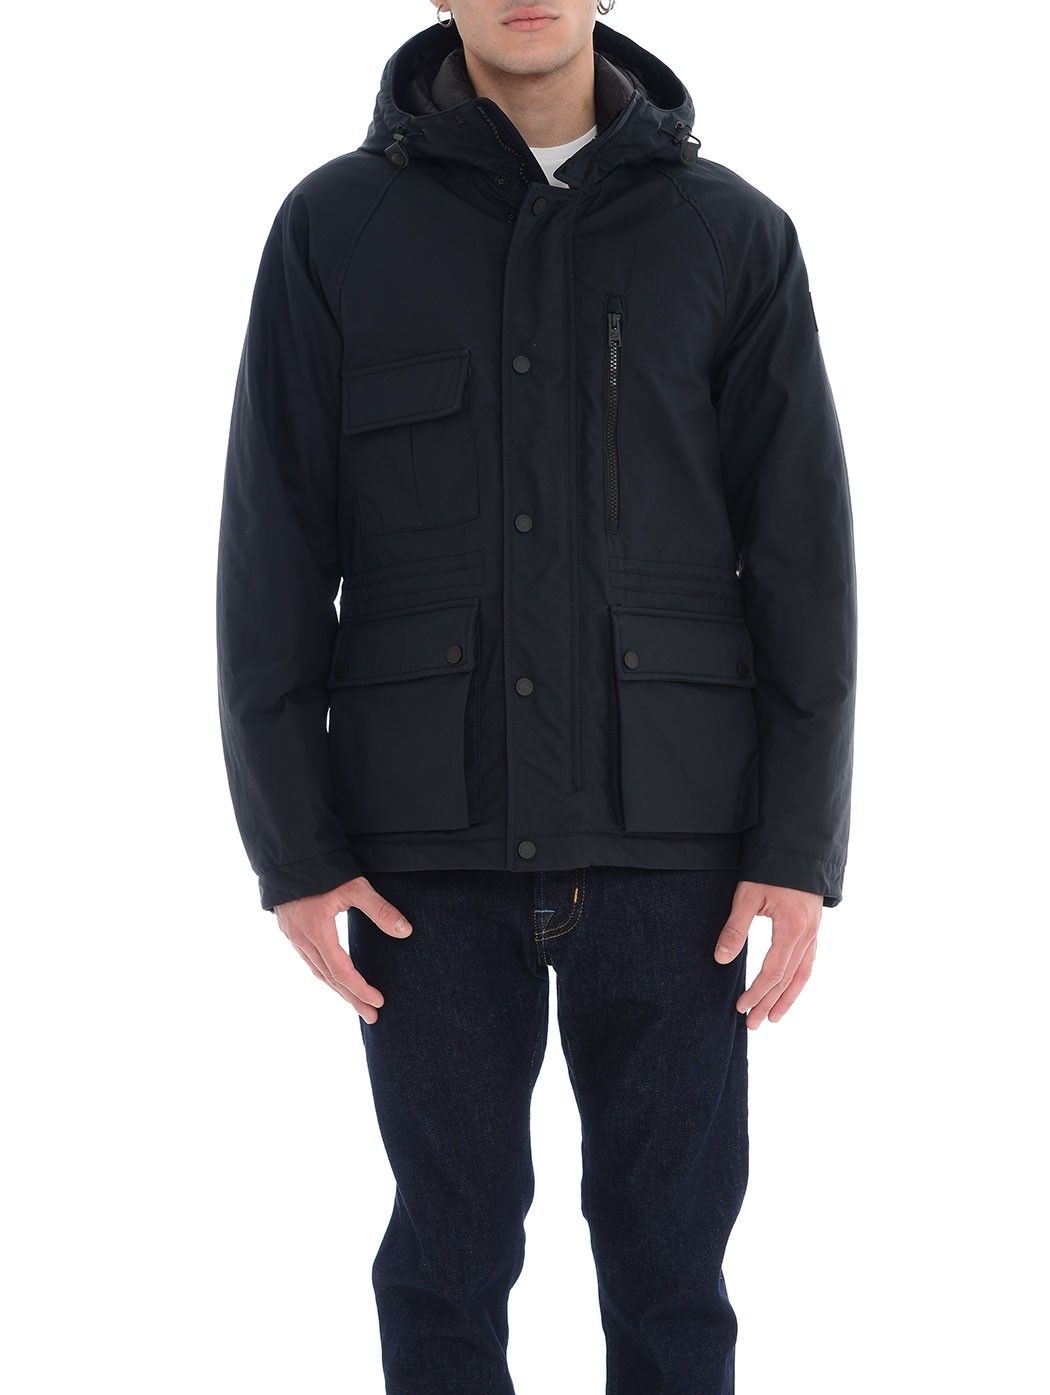  OUTLET,FALL WINTER COLLECTION,MENSWEAR,WOMENSWEAR,FALL WINTER SALES,FALL WINTER DISCOUNT  WOOLRICH WOOU0466MR